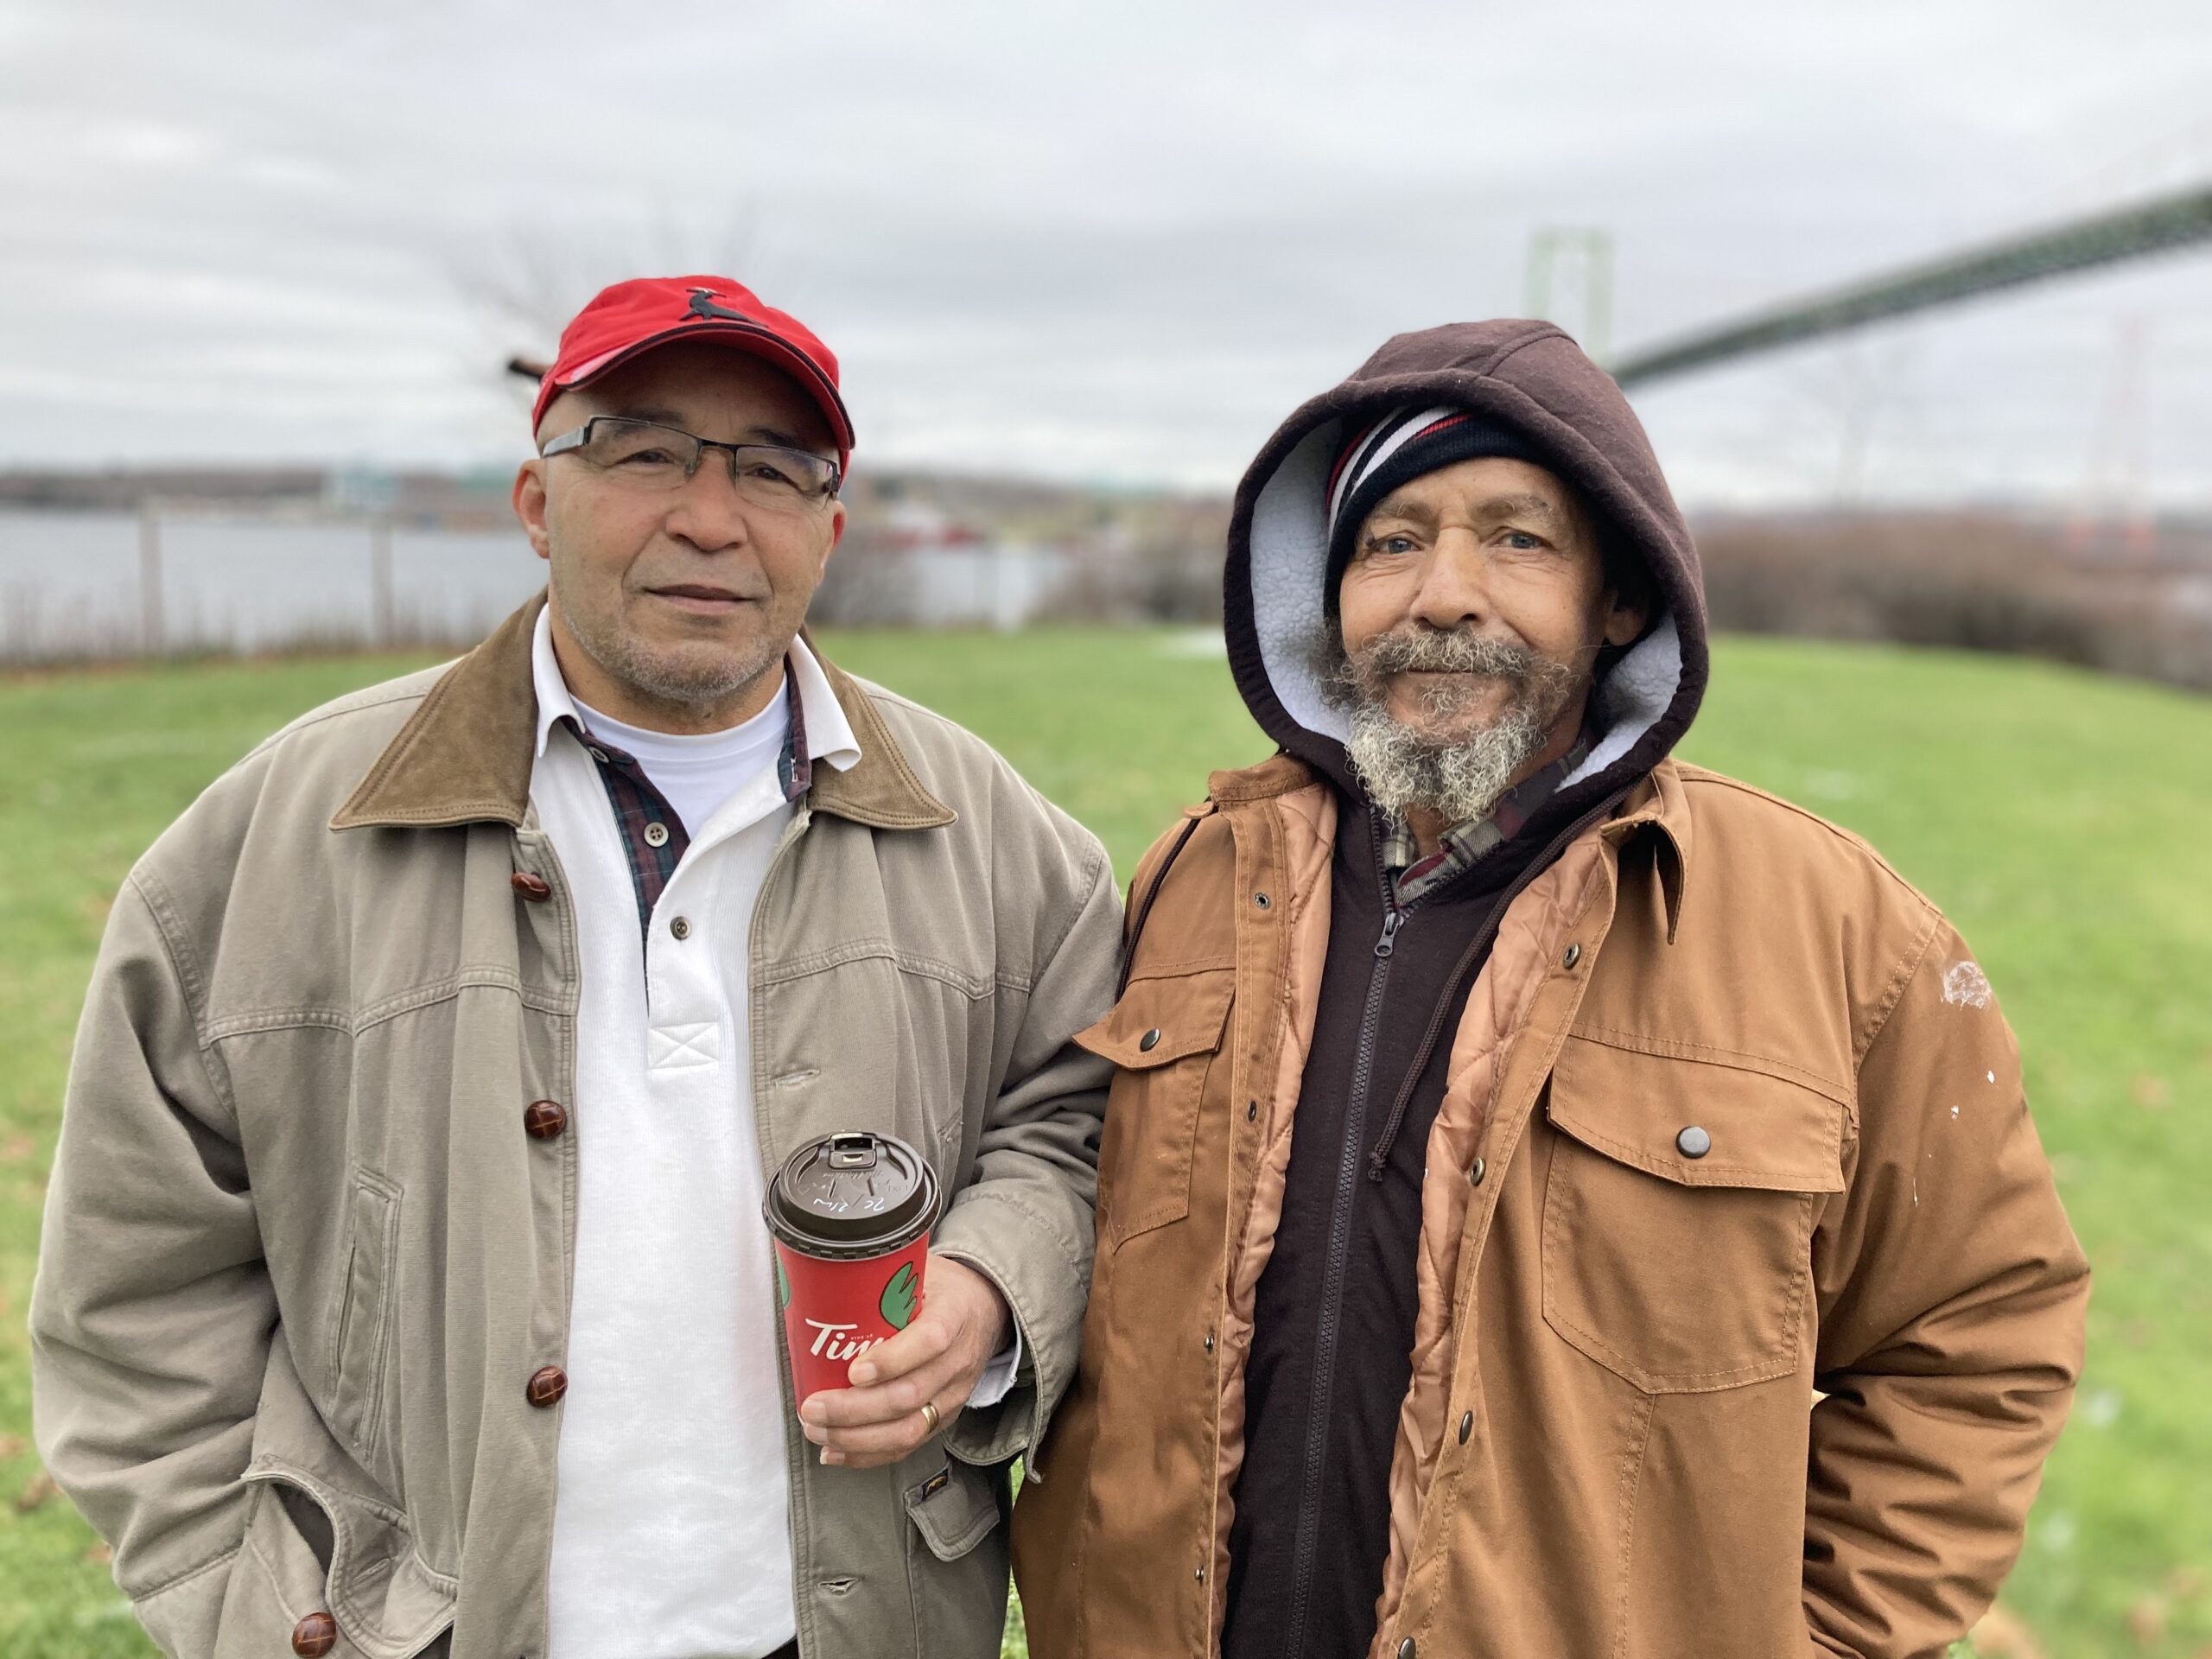 Black man with tanned fall jacket, red hat, and Tim hortons cup, stands next to Black man in brown hhoding and lighter brown coat with the MacKay Bridge in the background blurred out